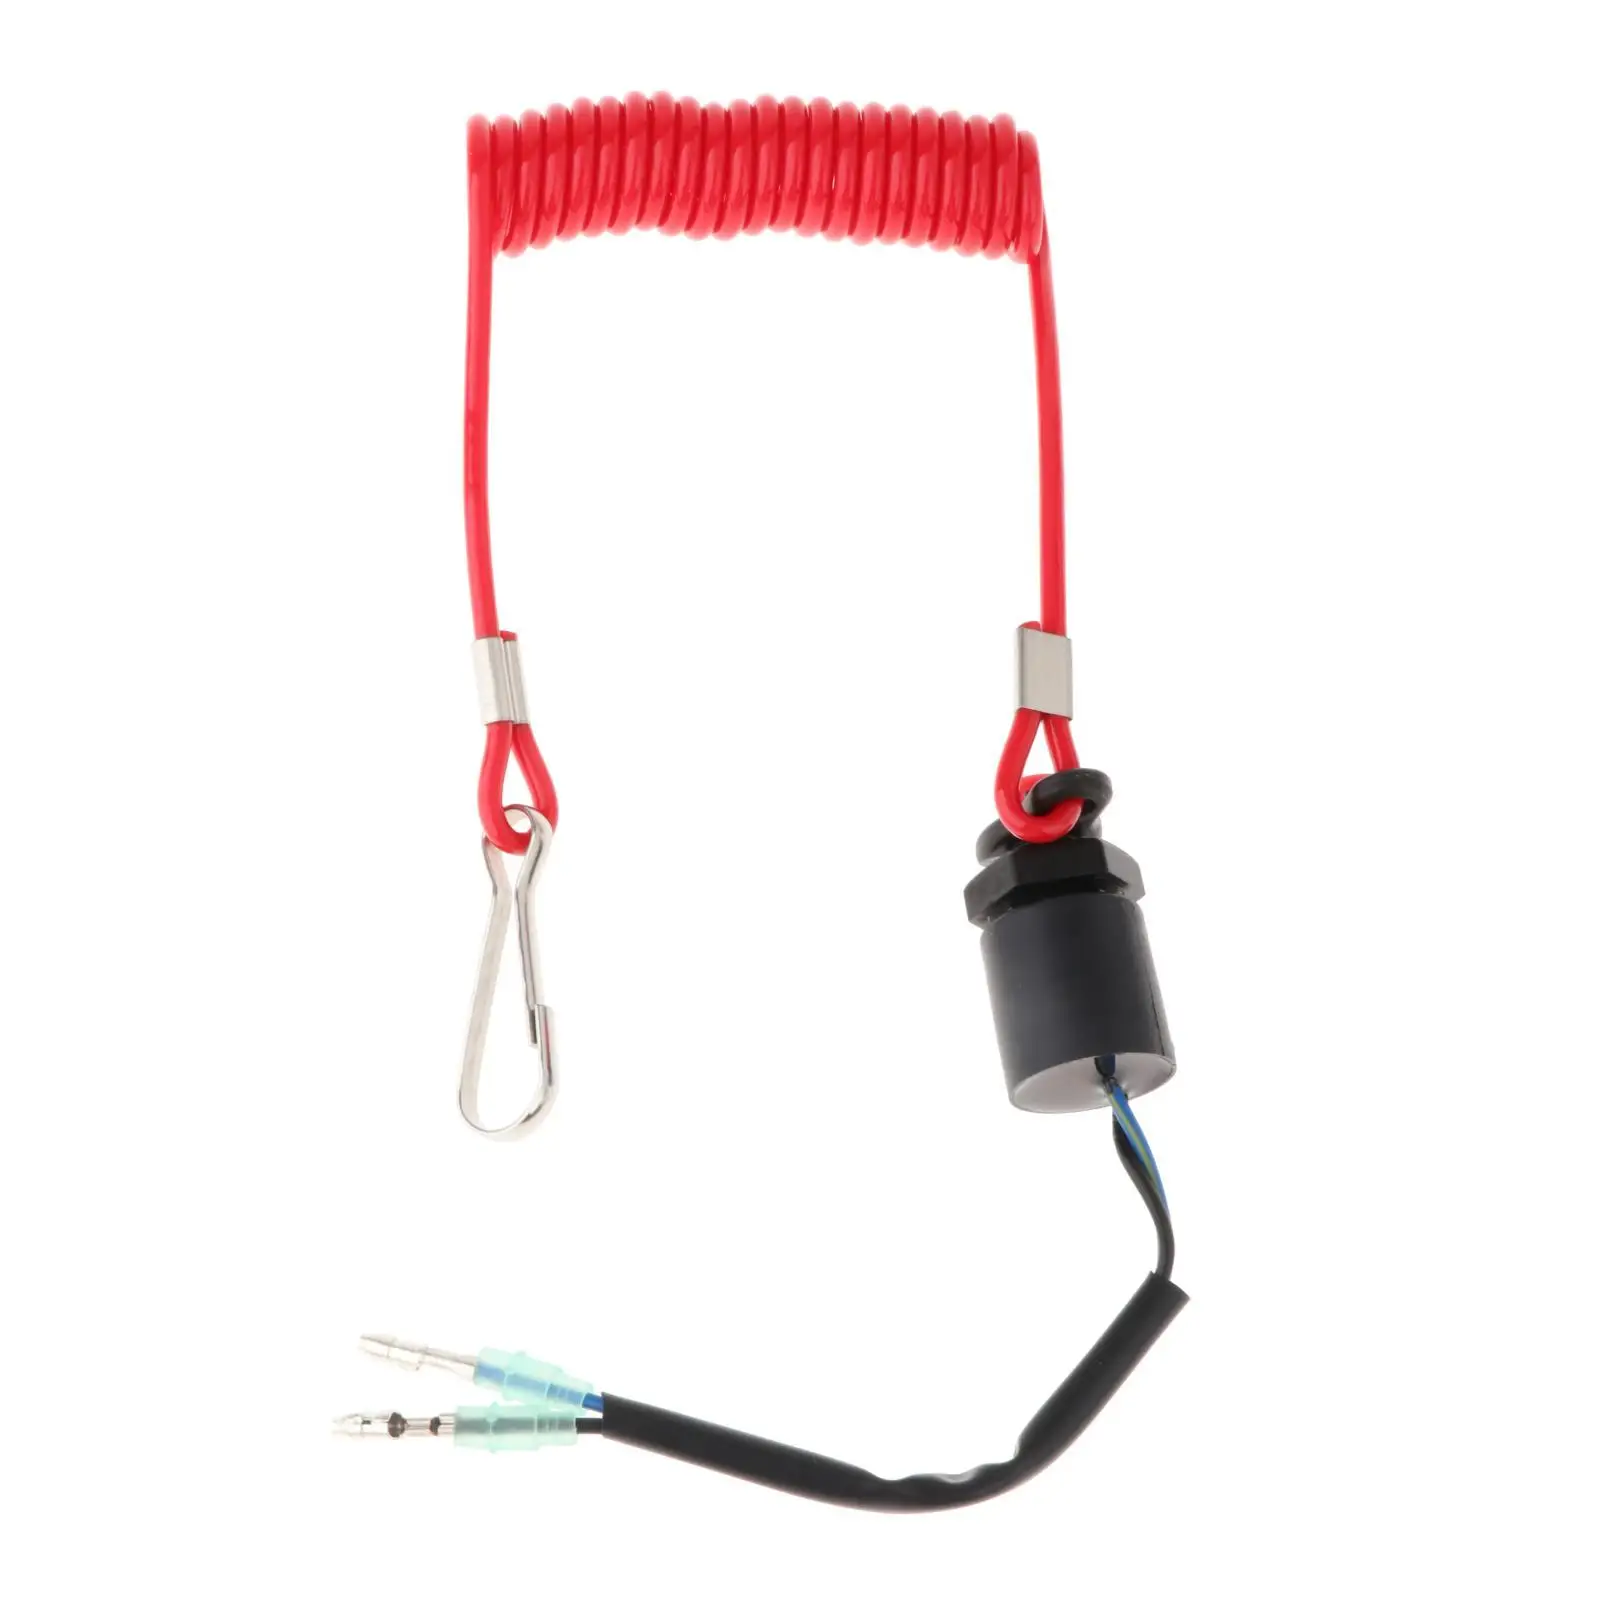 Boat Outboard Switch 37820-92E03 Safety Lanyard Cord Emergency Cut Off Cord Boat Kill Switch with Lanyard for Suzuki DT DF